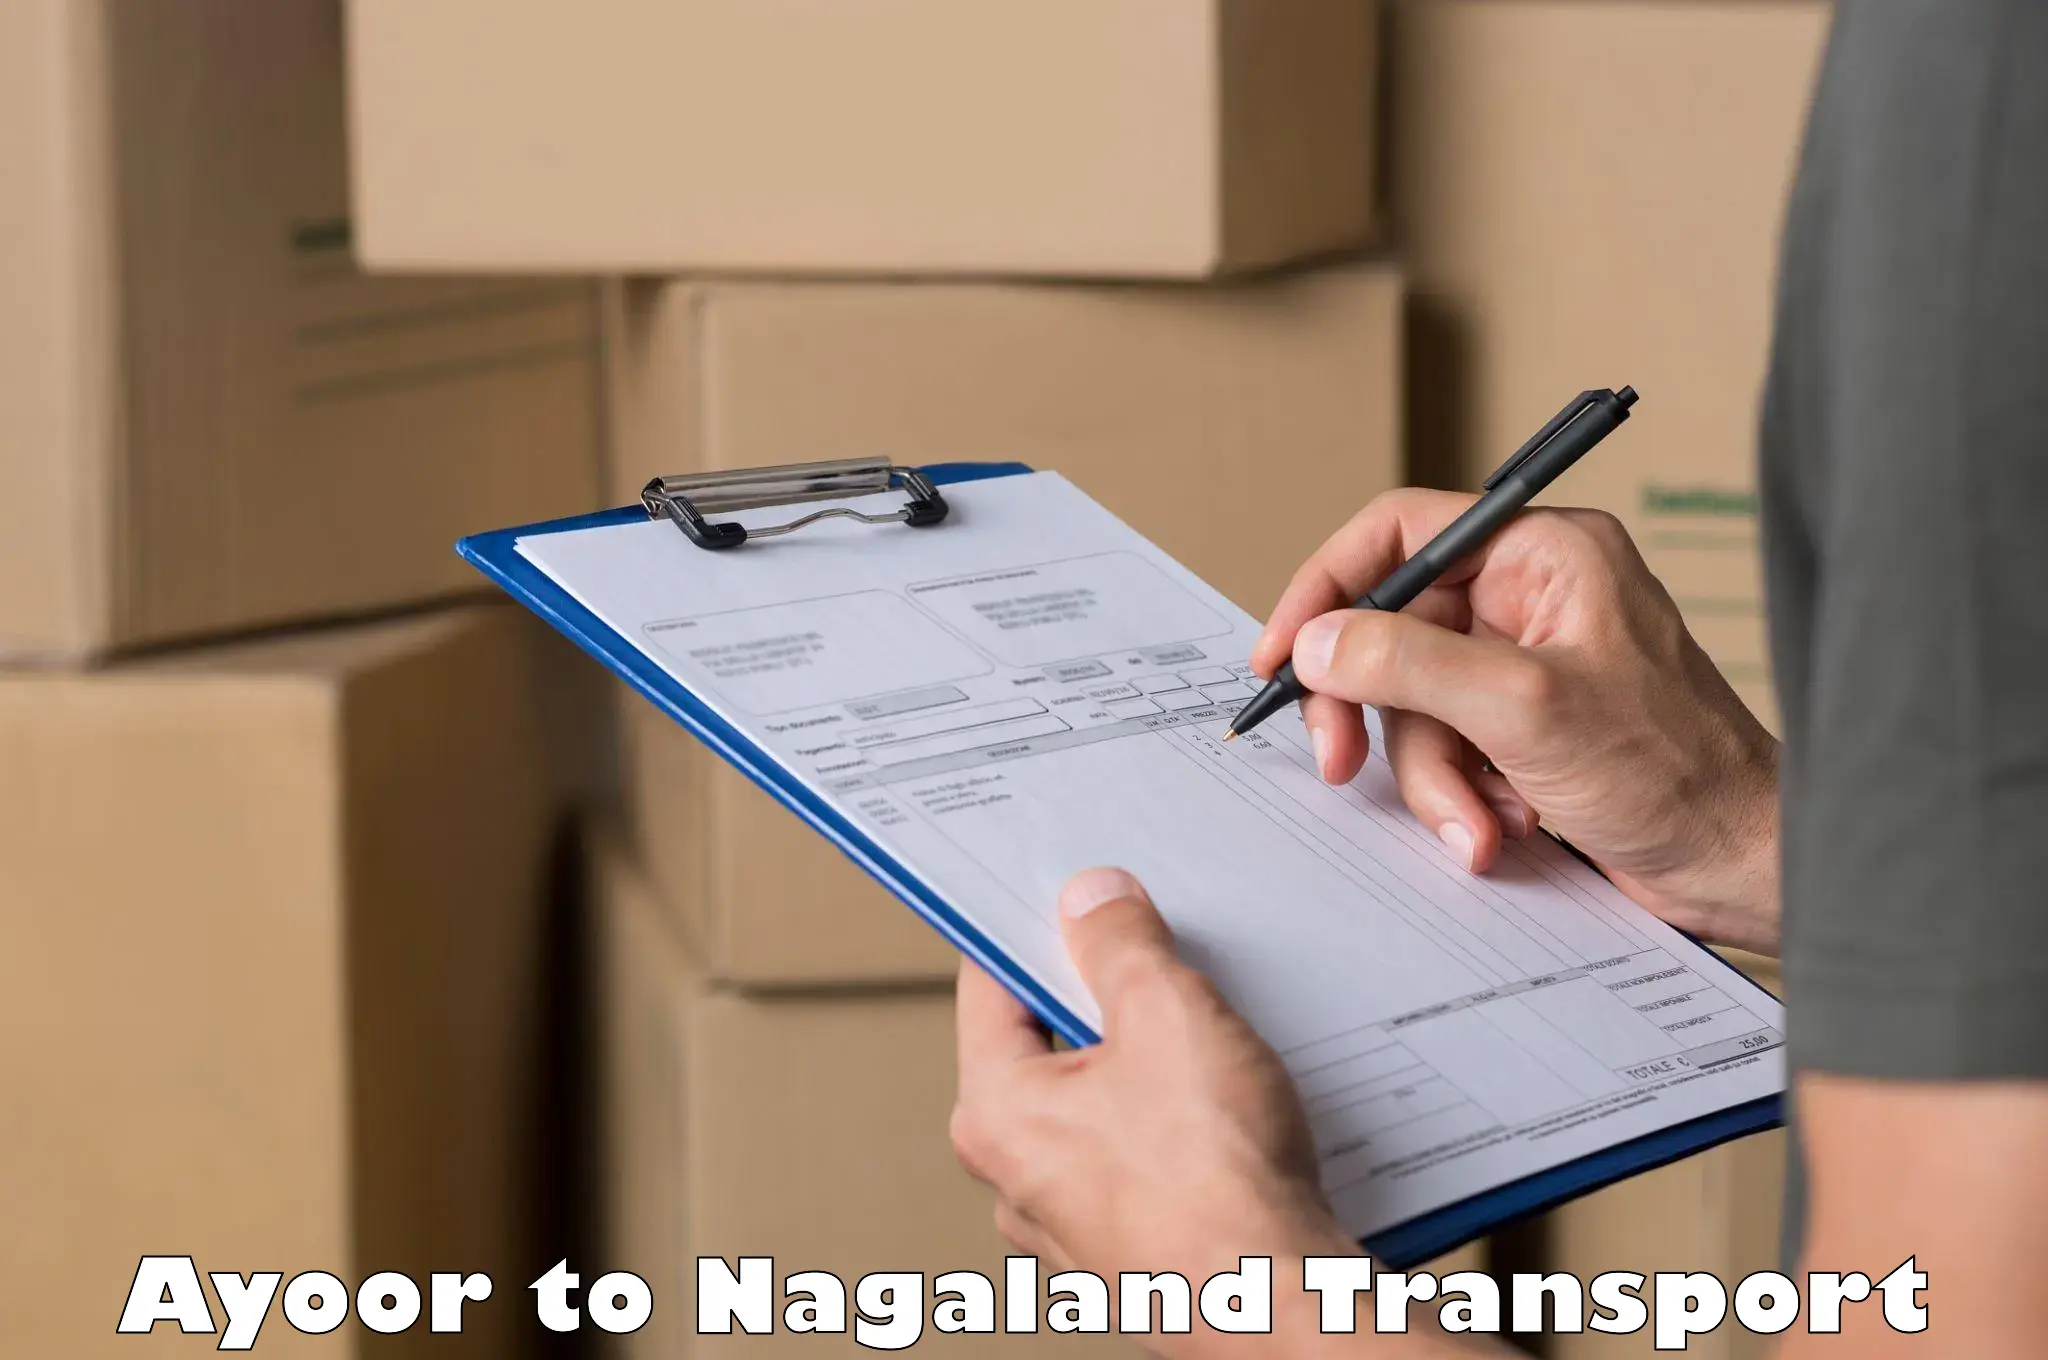 Truck transport companies in India Ayoor to Nagaland